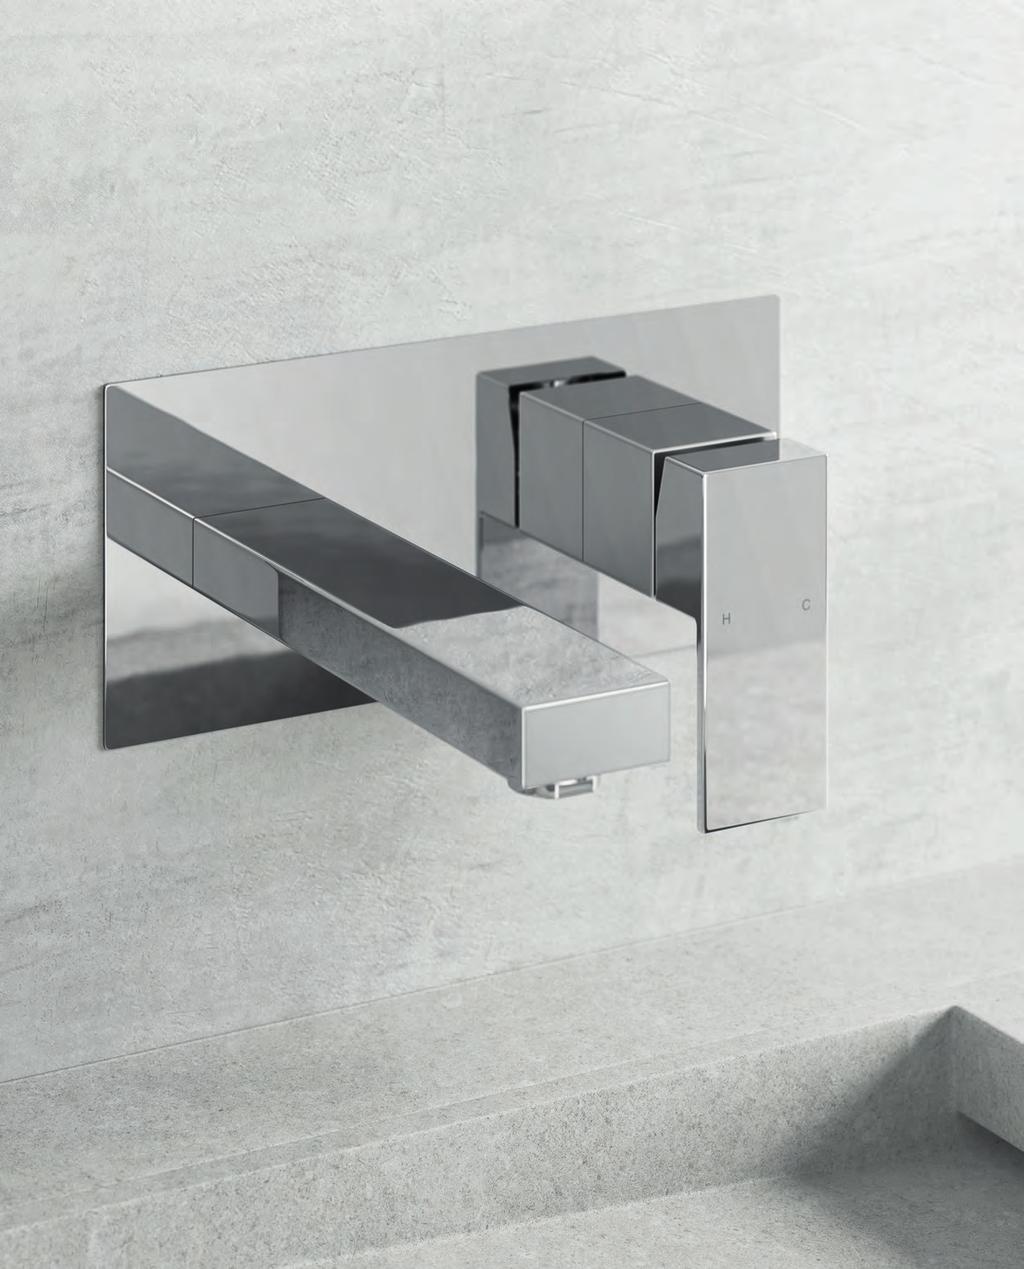 NEW VOSSEN The new Vossen design has a distinct flavour of Art Deco design. Visualise this elegant shape teamed with a retro-style bathroom.